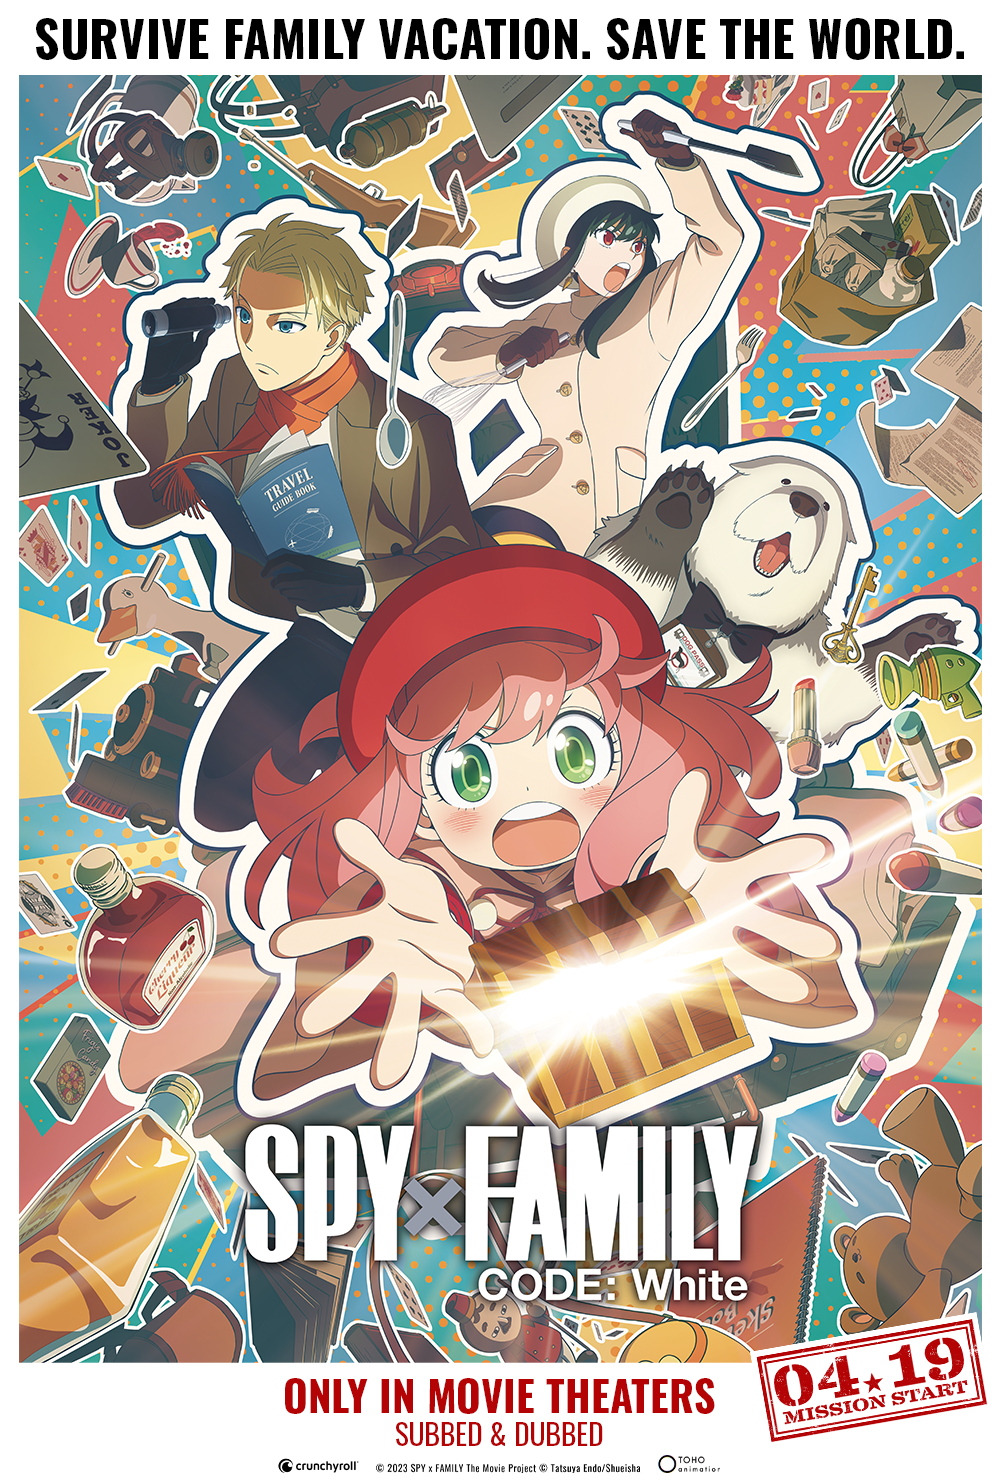 Dive Deep into the Wholesome Adventure of “Spy x Family Code: White”